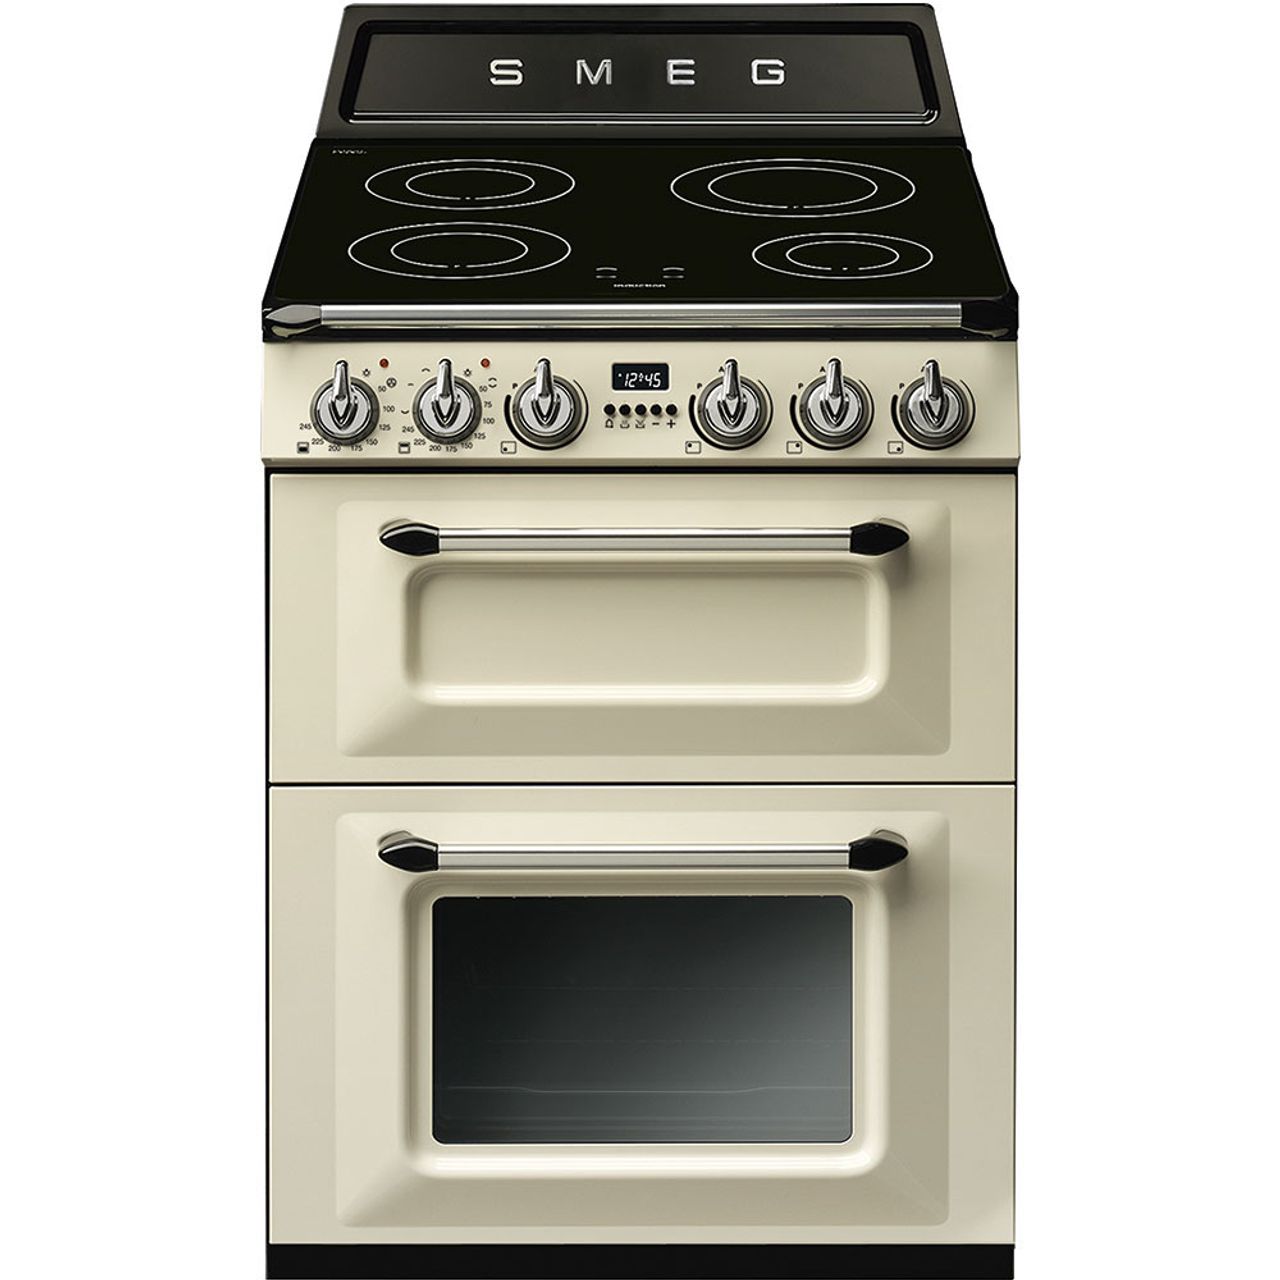 Smeg Victoria TR62IP Electric Cooker with Induction Hob Review